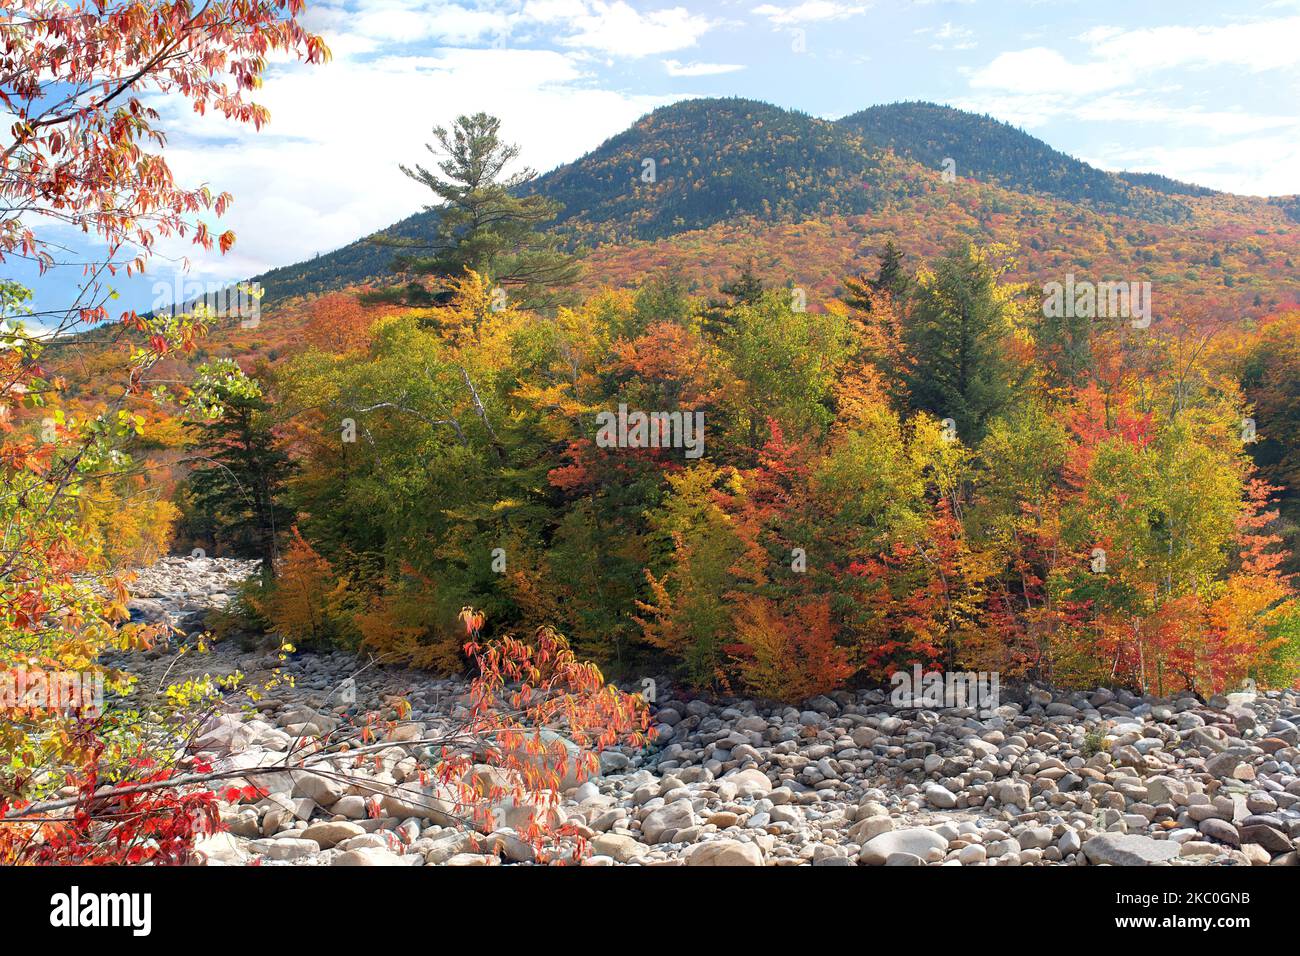 Autumn scene in White Mountains of New Hampshire. Vibrant fall foliage, rocky riverbed of Pemigewasset River and twin rounded peaks of Black Mountain. Stock Photo